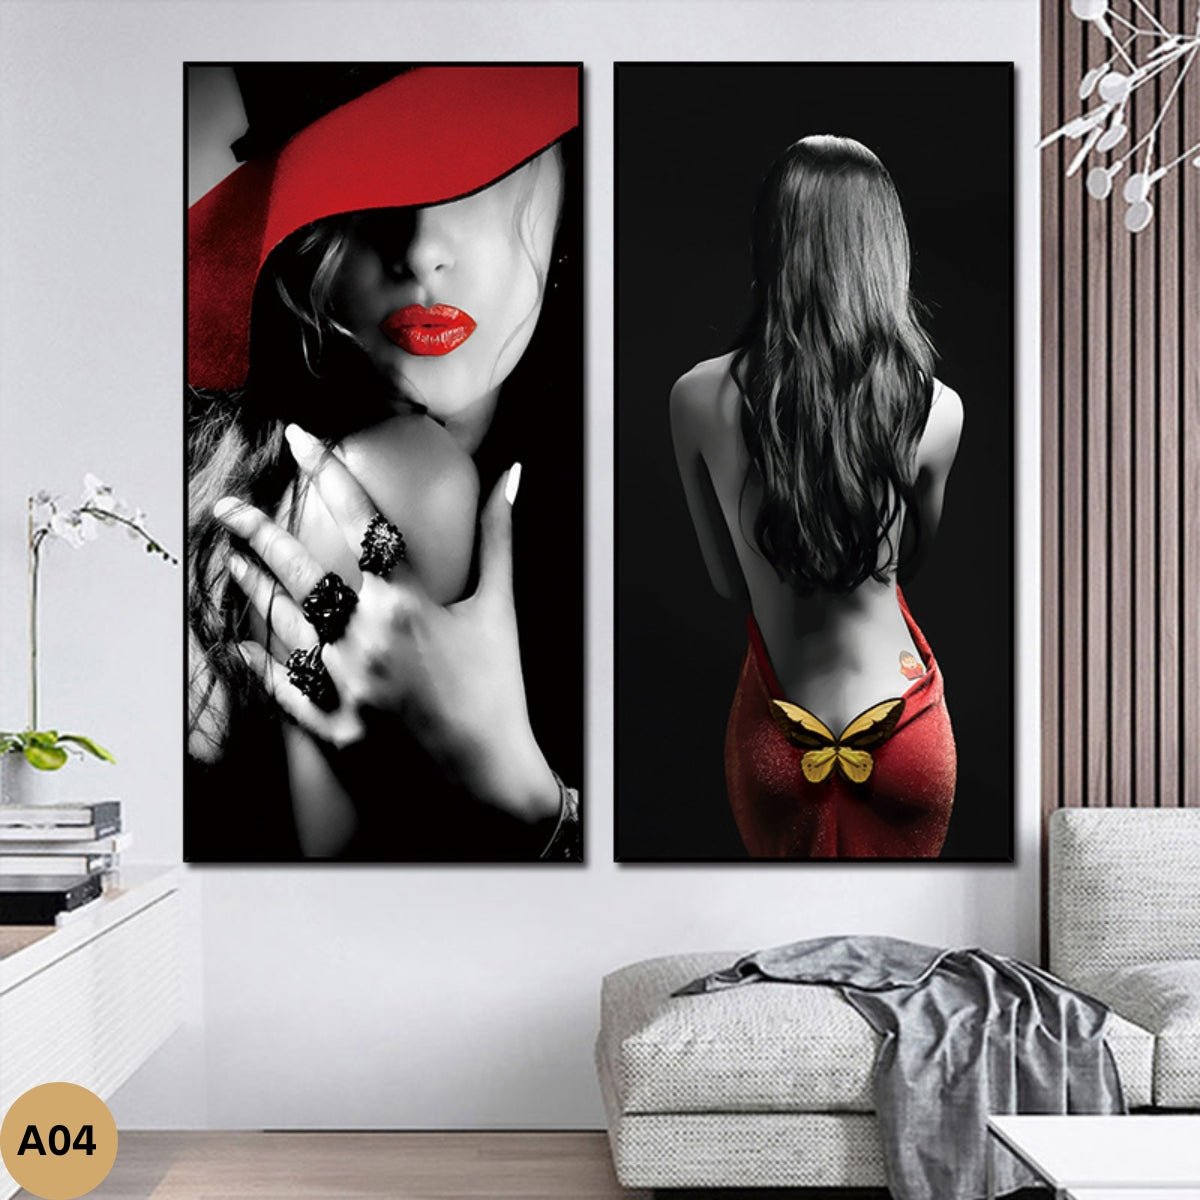 Brand New Modern Red Hat Woman Large Wall Art Wall Decor Painting Canvas Stainless Steel Frame (Custom made)